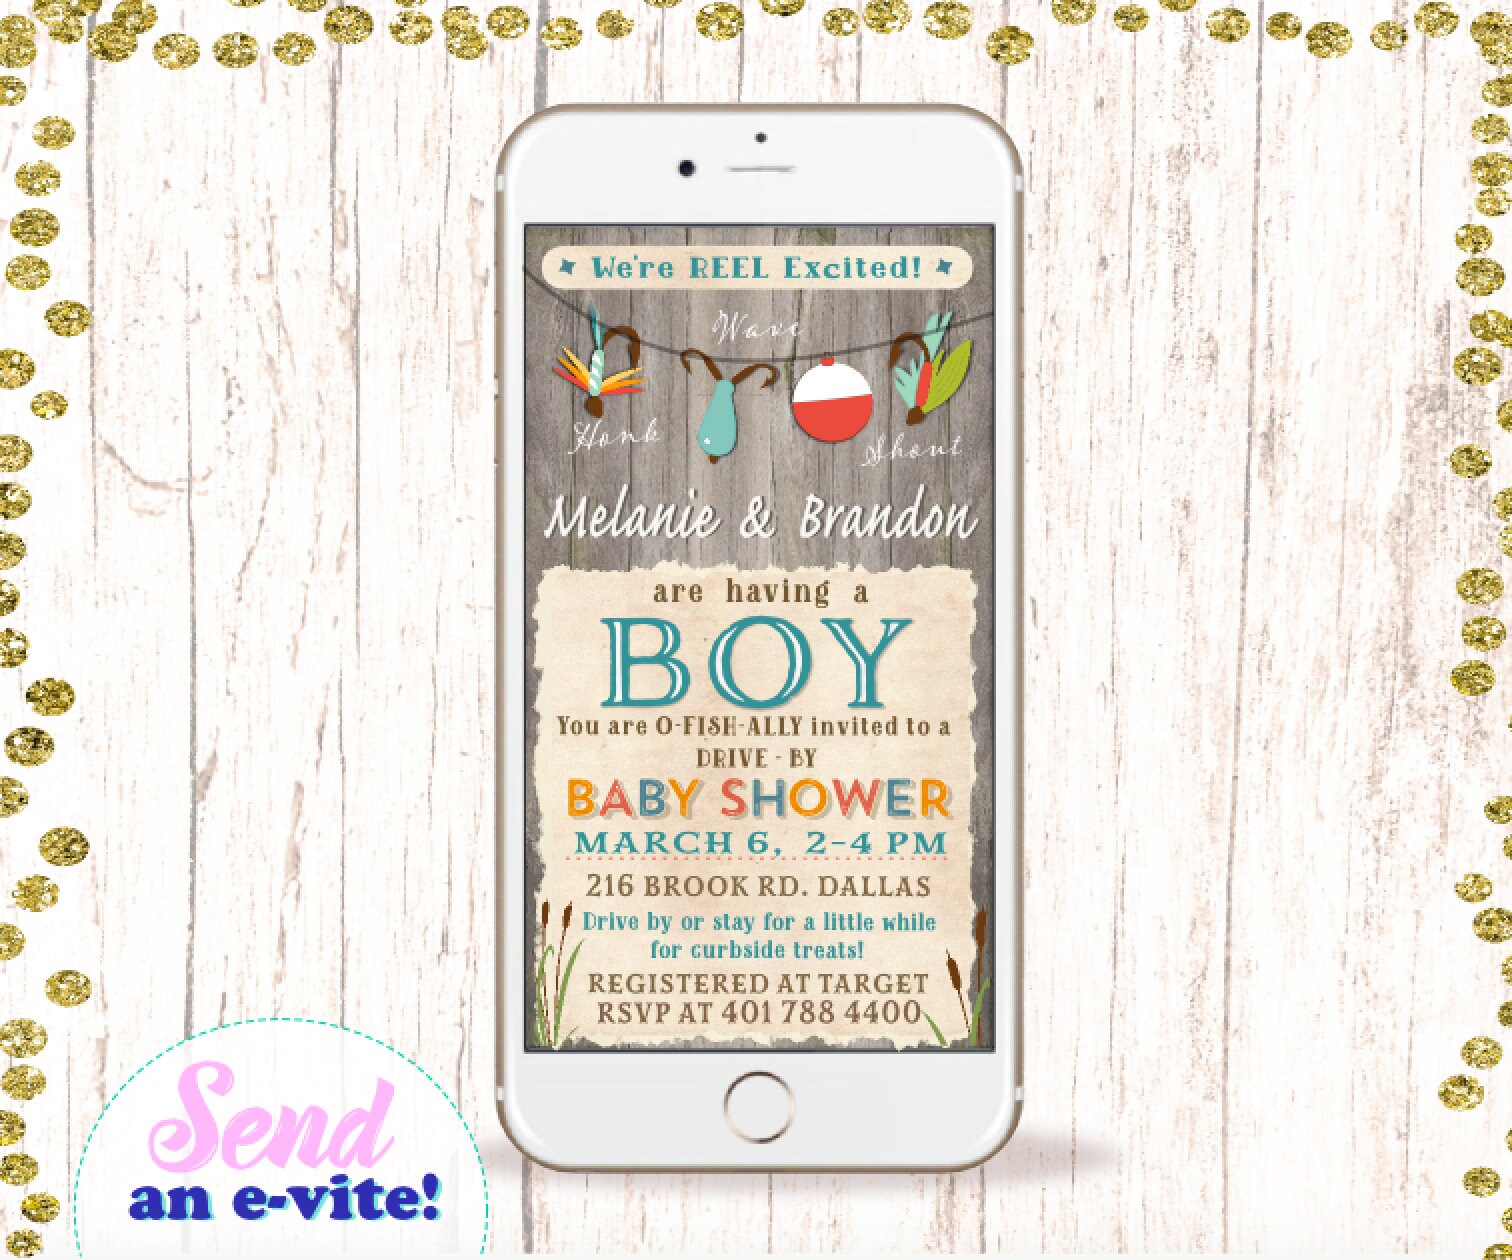 Fishing Baby Shower Party Bundle, Includes Editable Invitation